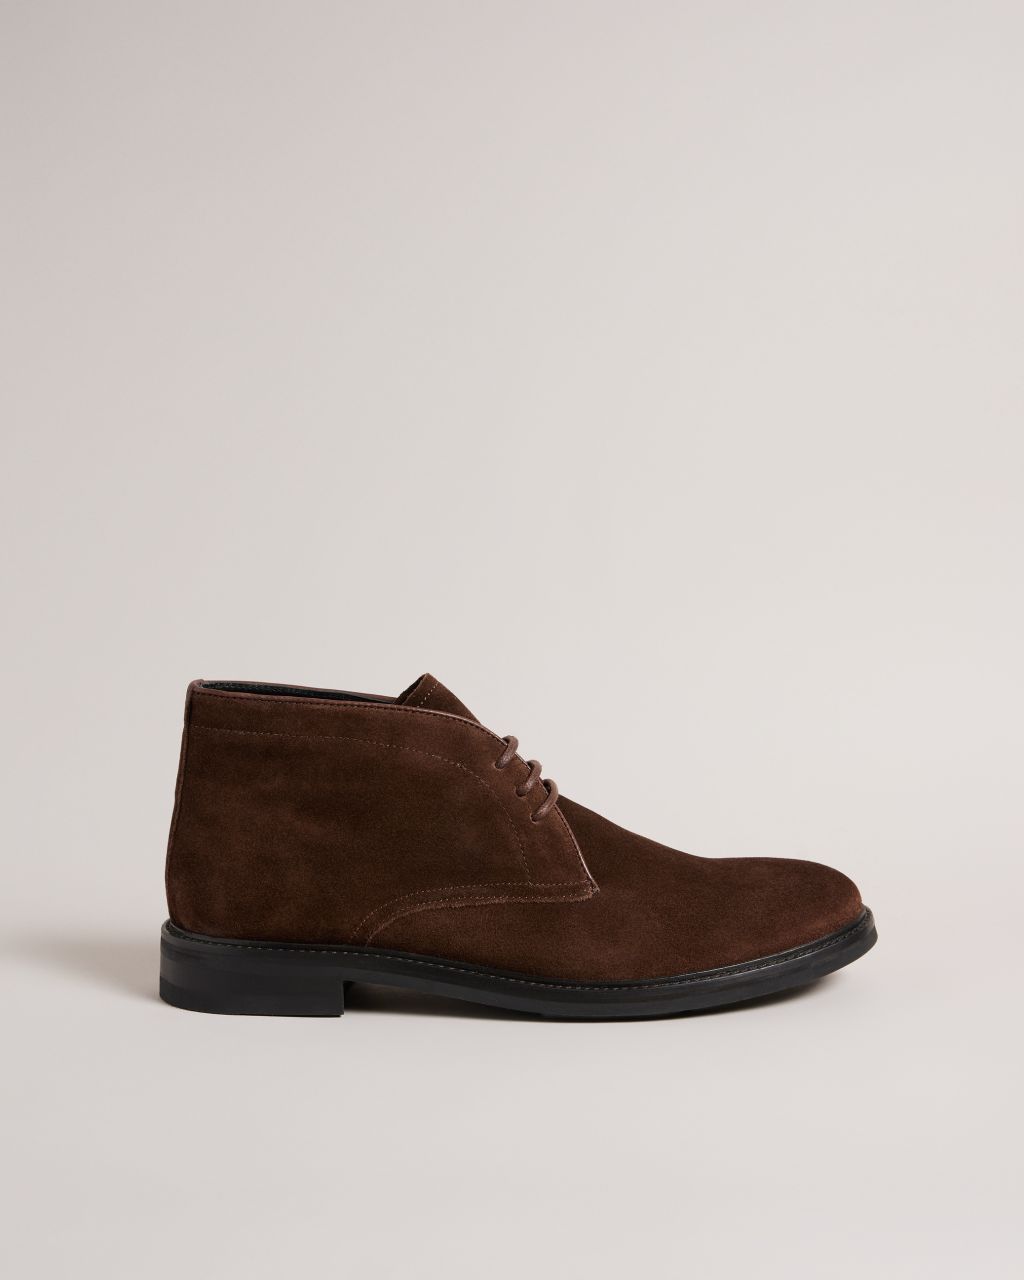 Ted Baker Men's Suede Chukka Button Sole Boots in Brown-Chocolate, Andrews, Leather